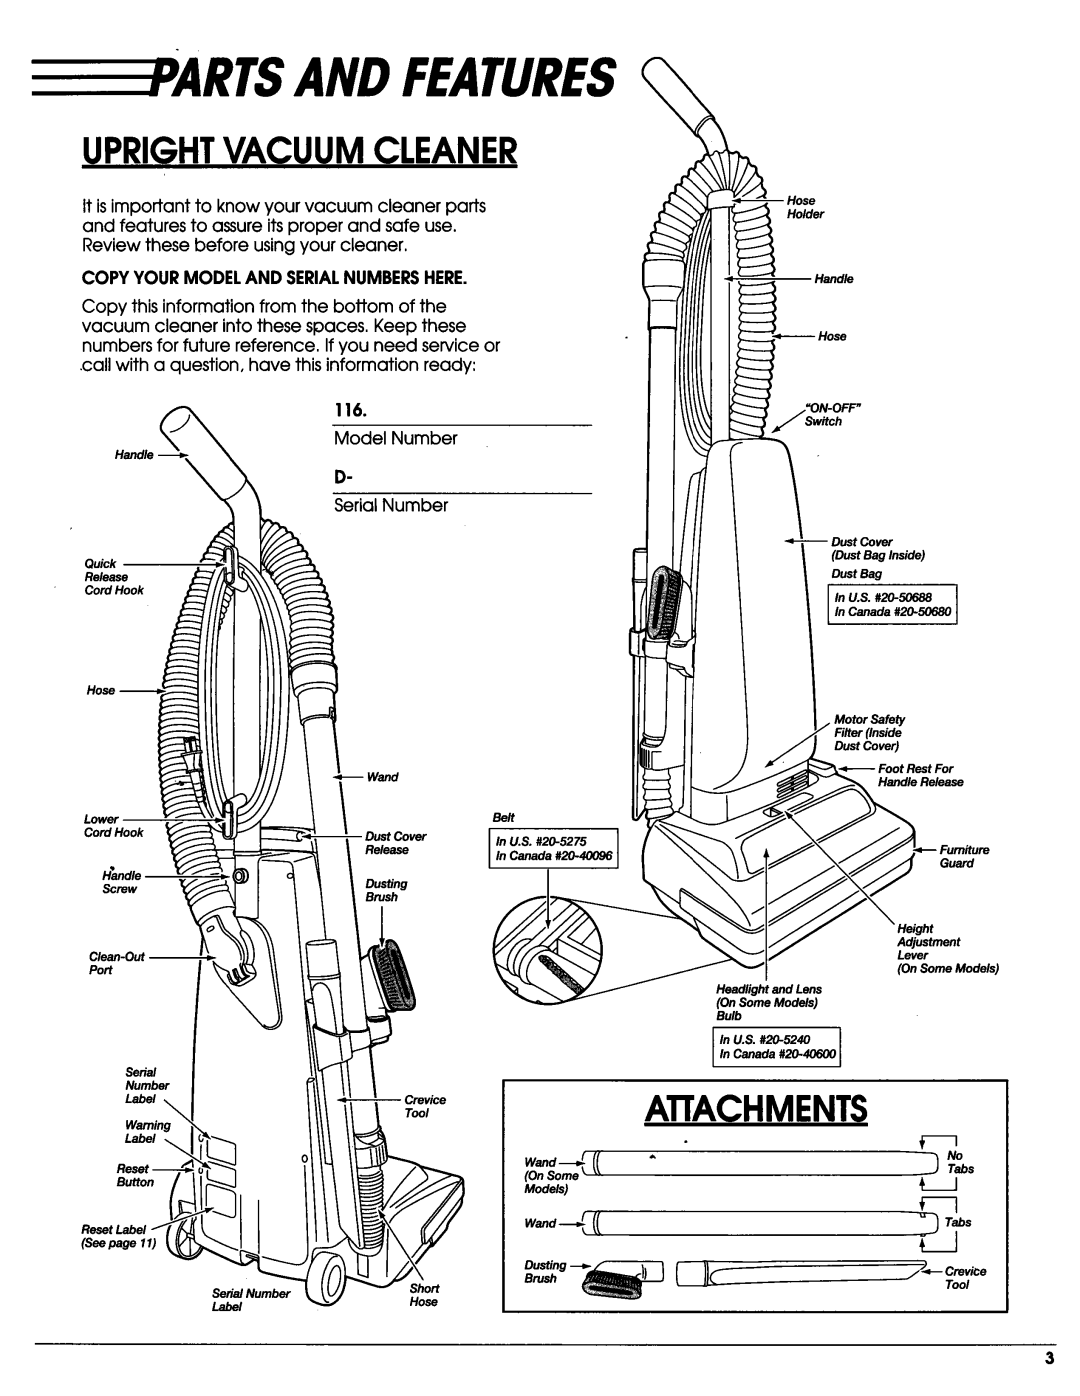 Sears Vacuum Cleaner Andfeatures, Uprightvacuum Cleaner, Attachments, oot,as oalr, Copy Your Model And Serialnumbershere 